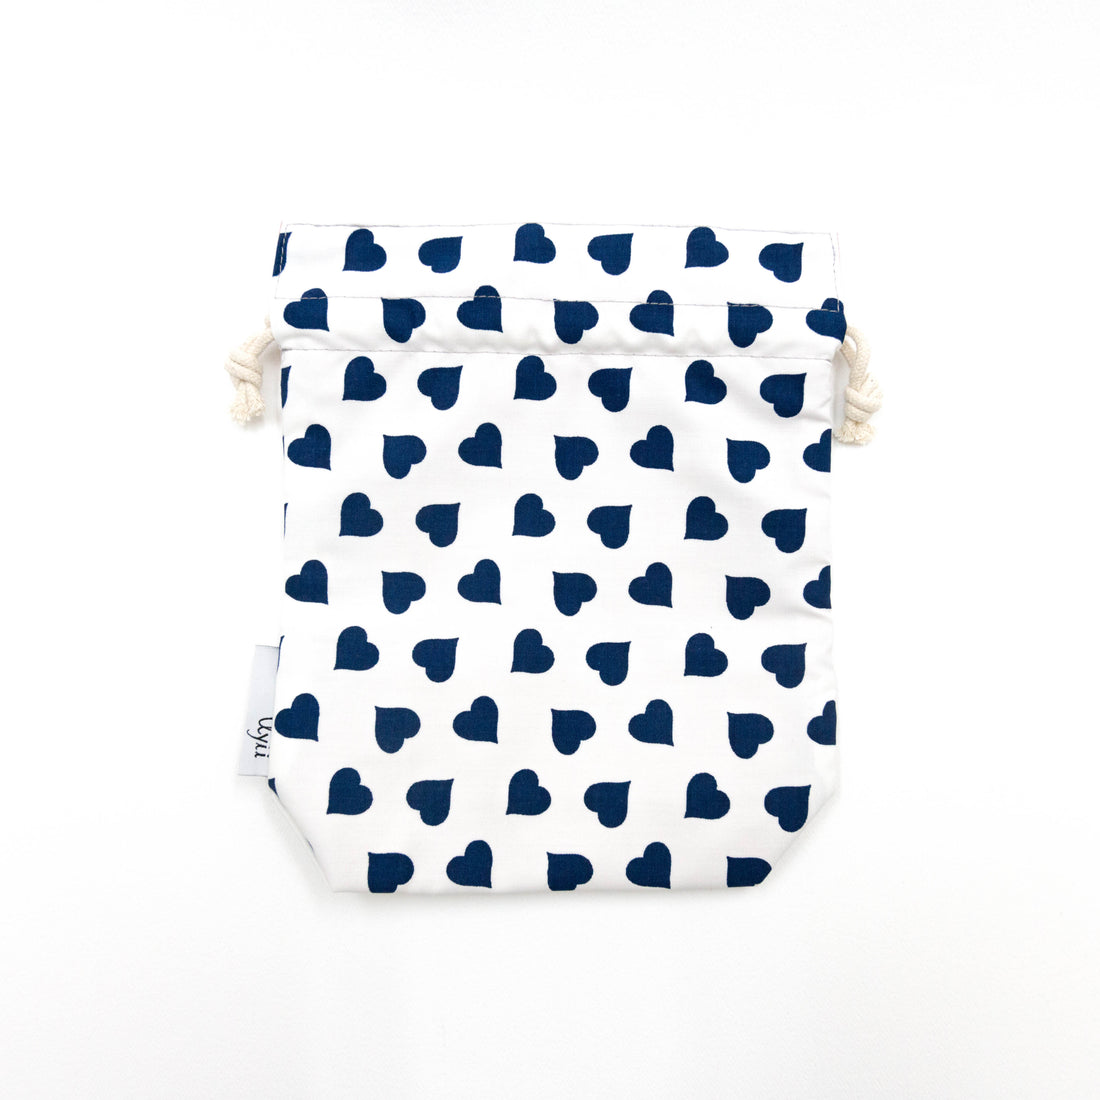 Blue Hearts x Pink Reversible Drawstring Pouch